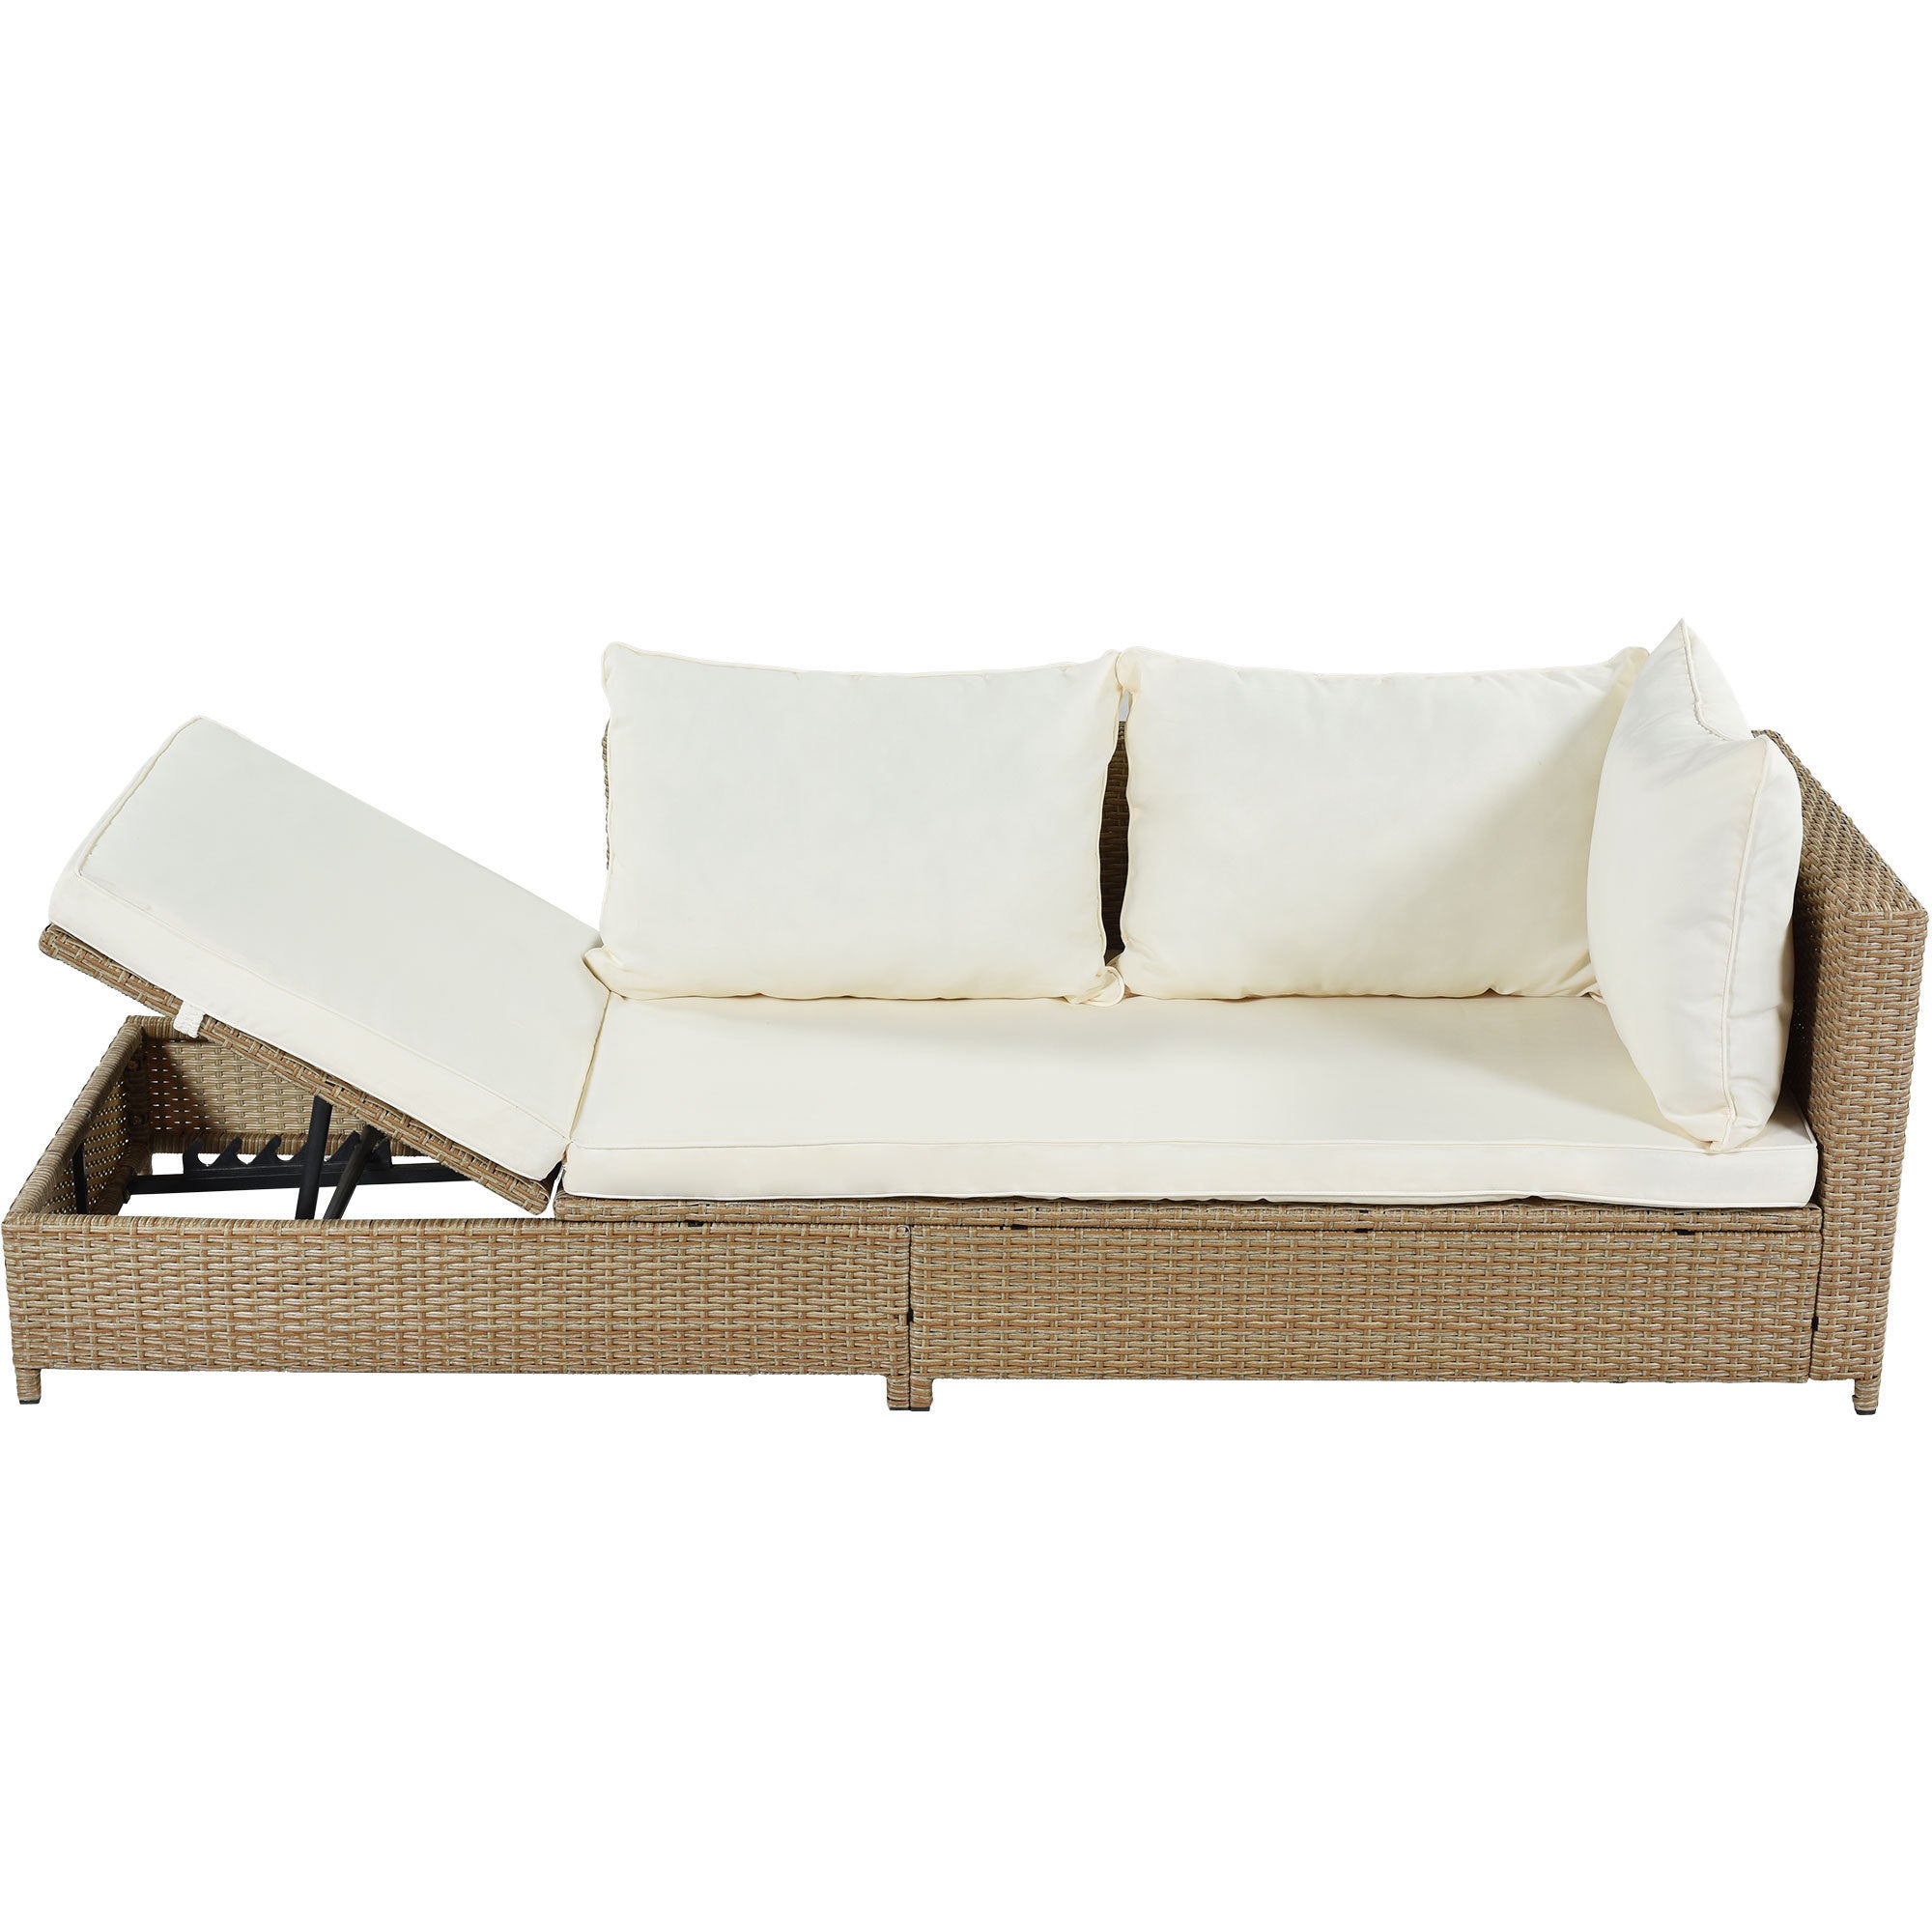 3-Piece Patio Rattan Sofa Set with Adjustable Chaise Lounge and Tempered Glass Table, Natural Brown+ Beige Cushion